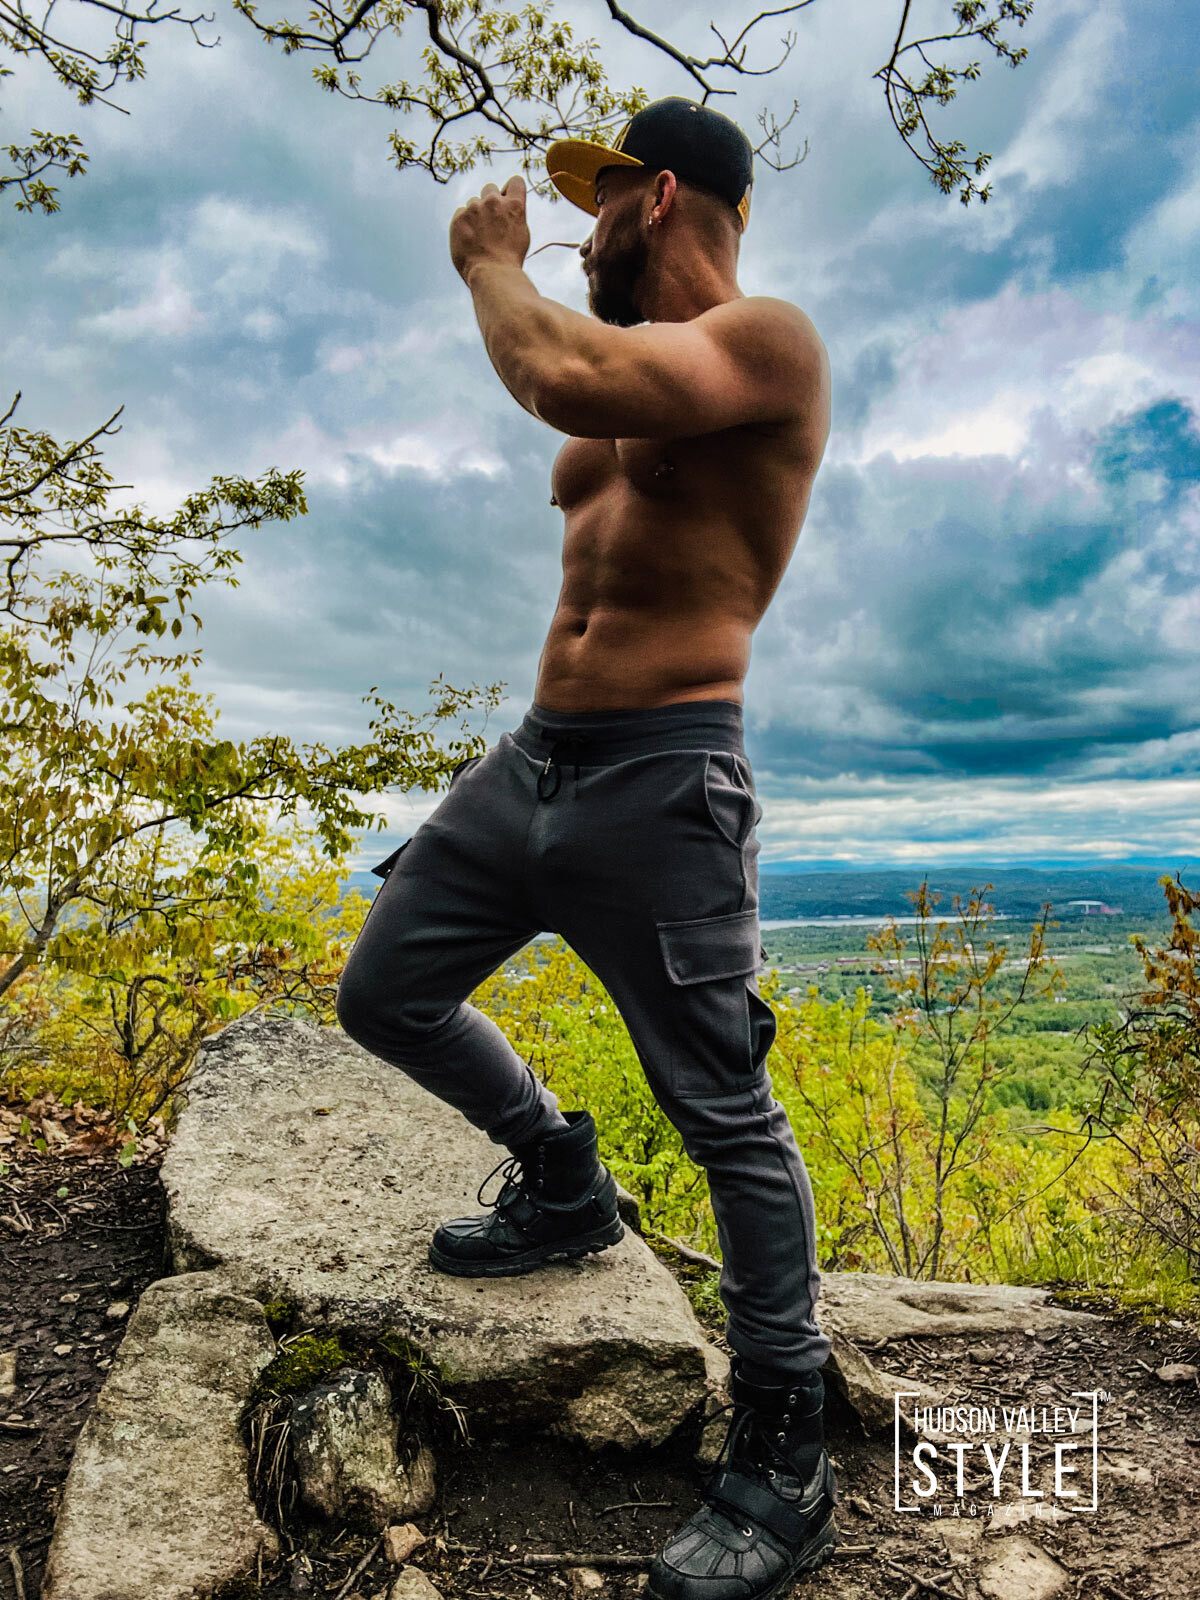 The Benefits of Hiking for Fitness and Bodybuilding – by Maxwell L Alexander, MA, BFA, Certified Elite Fitness Trainer, Bodybuilding and Sports Nutrition Coach